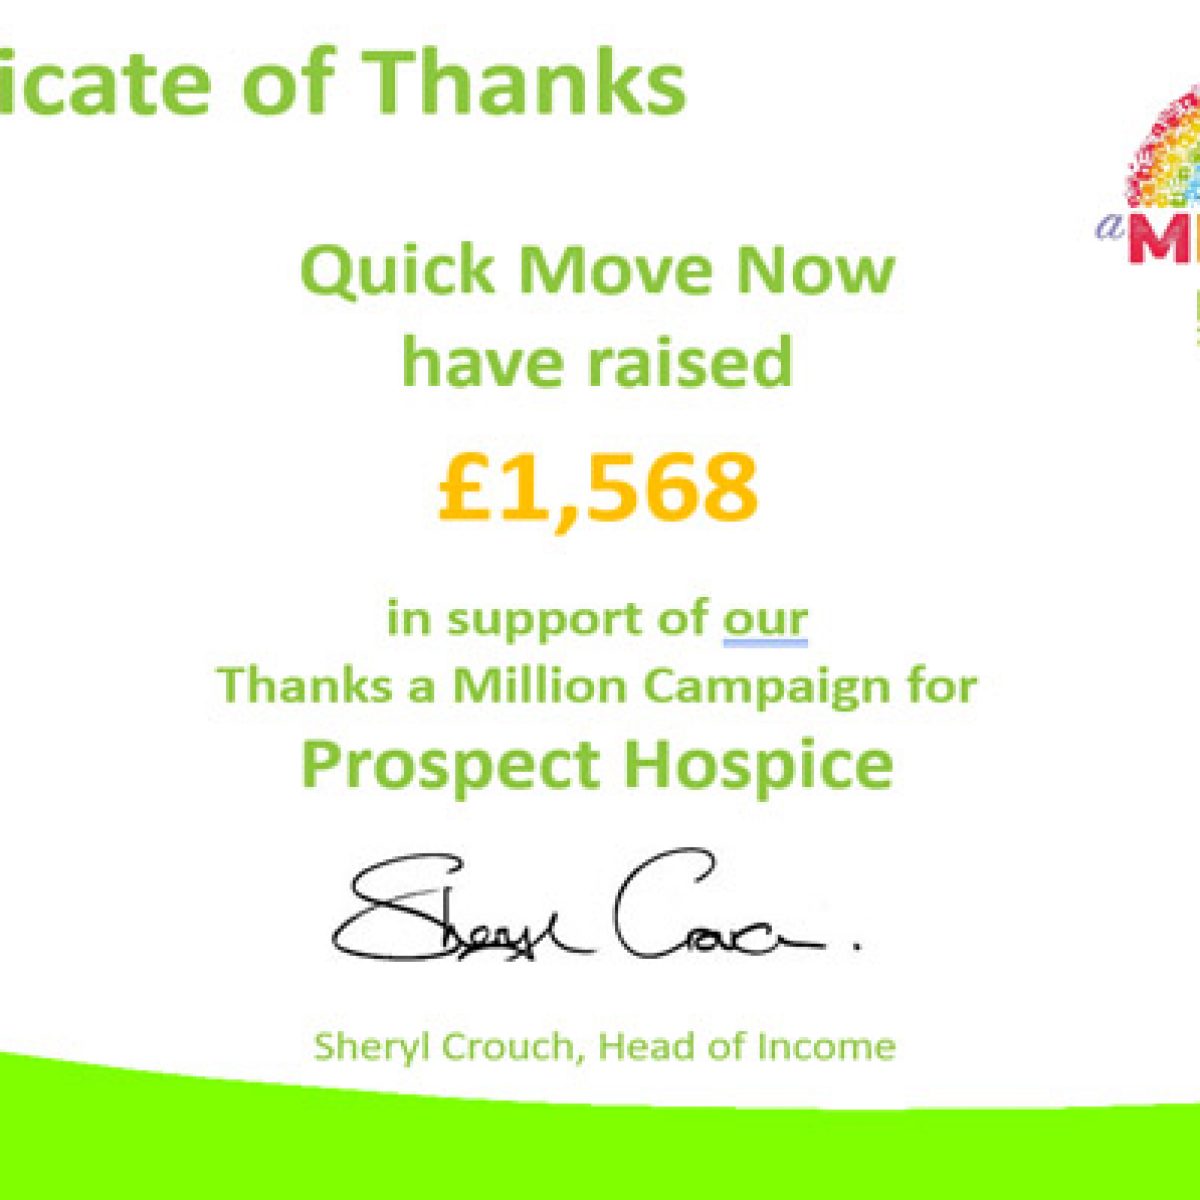 Prospect Hospice says ‘Thanks a Million’ for Quick Move Now’s fundraising efforts